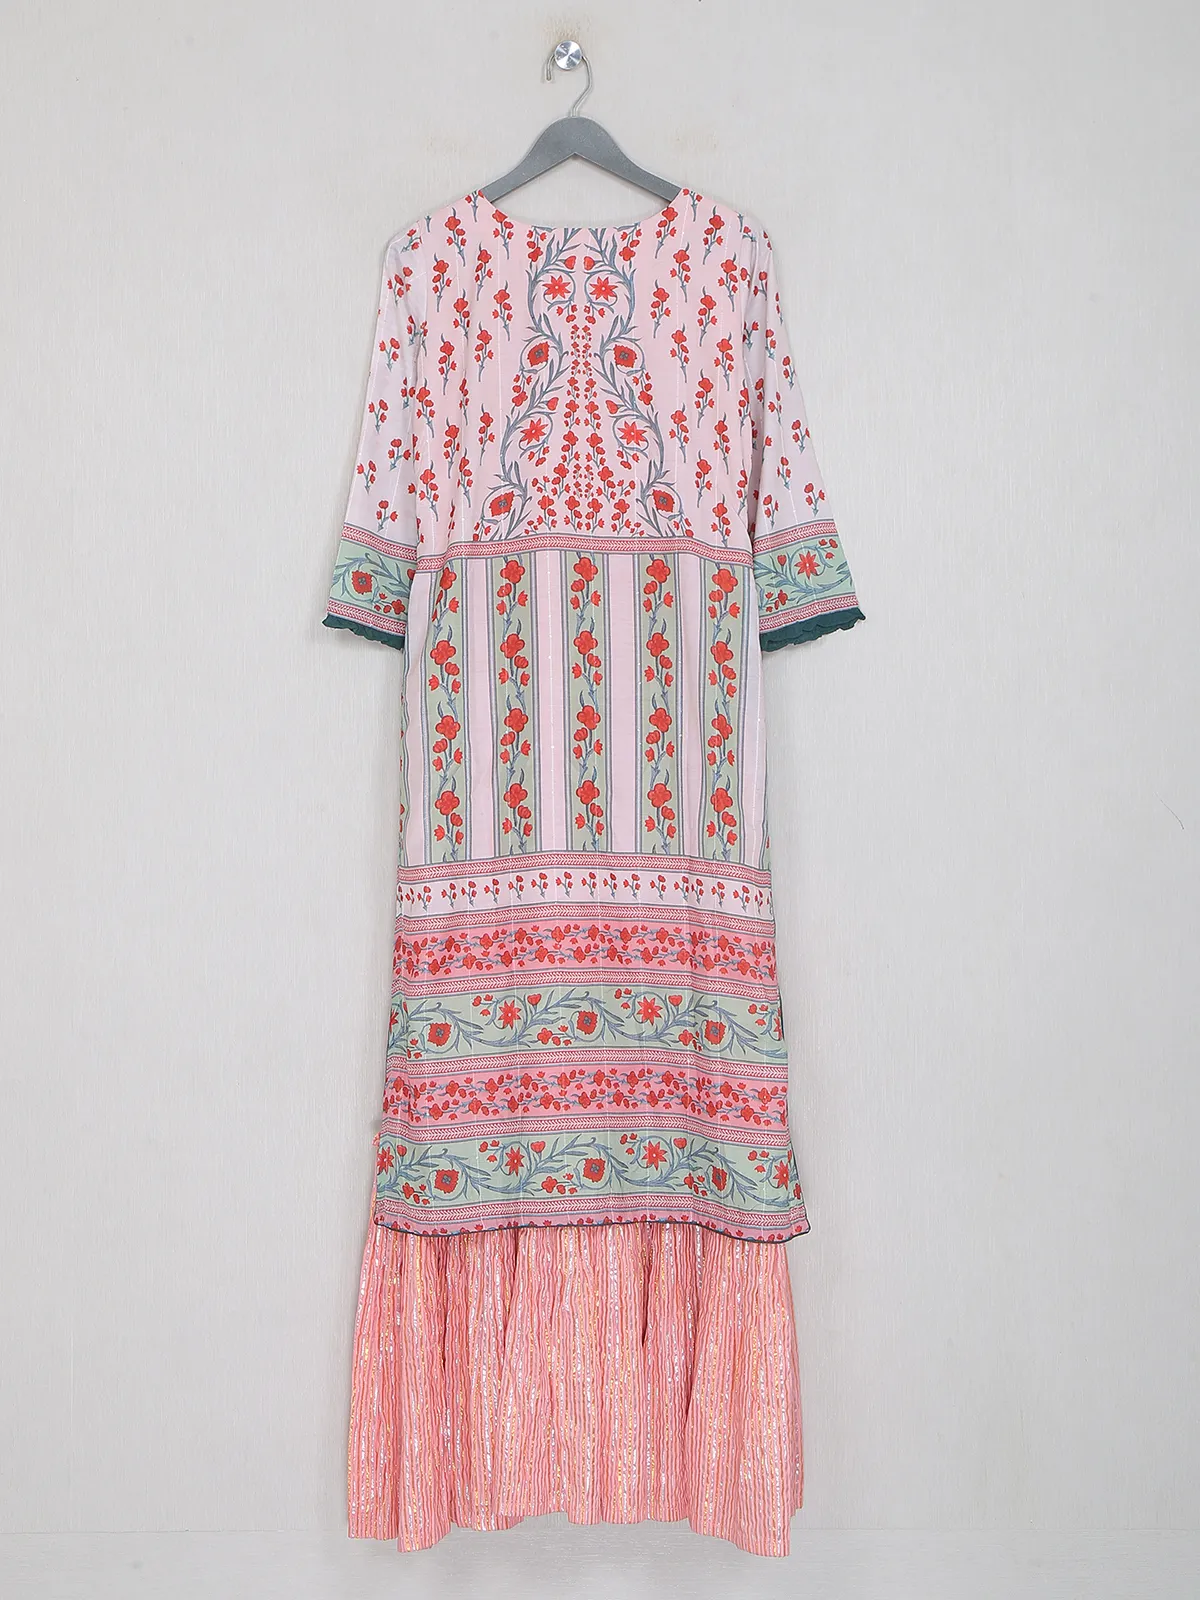 Printed rose pink cotton kurti for casual occasions